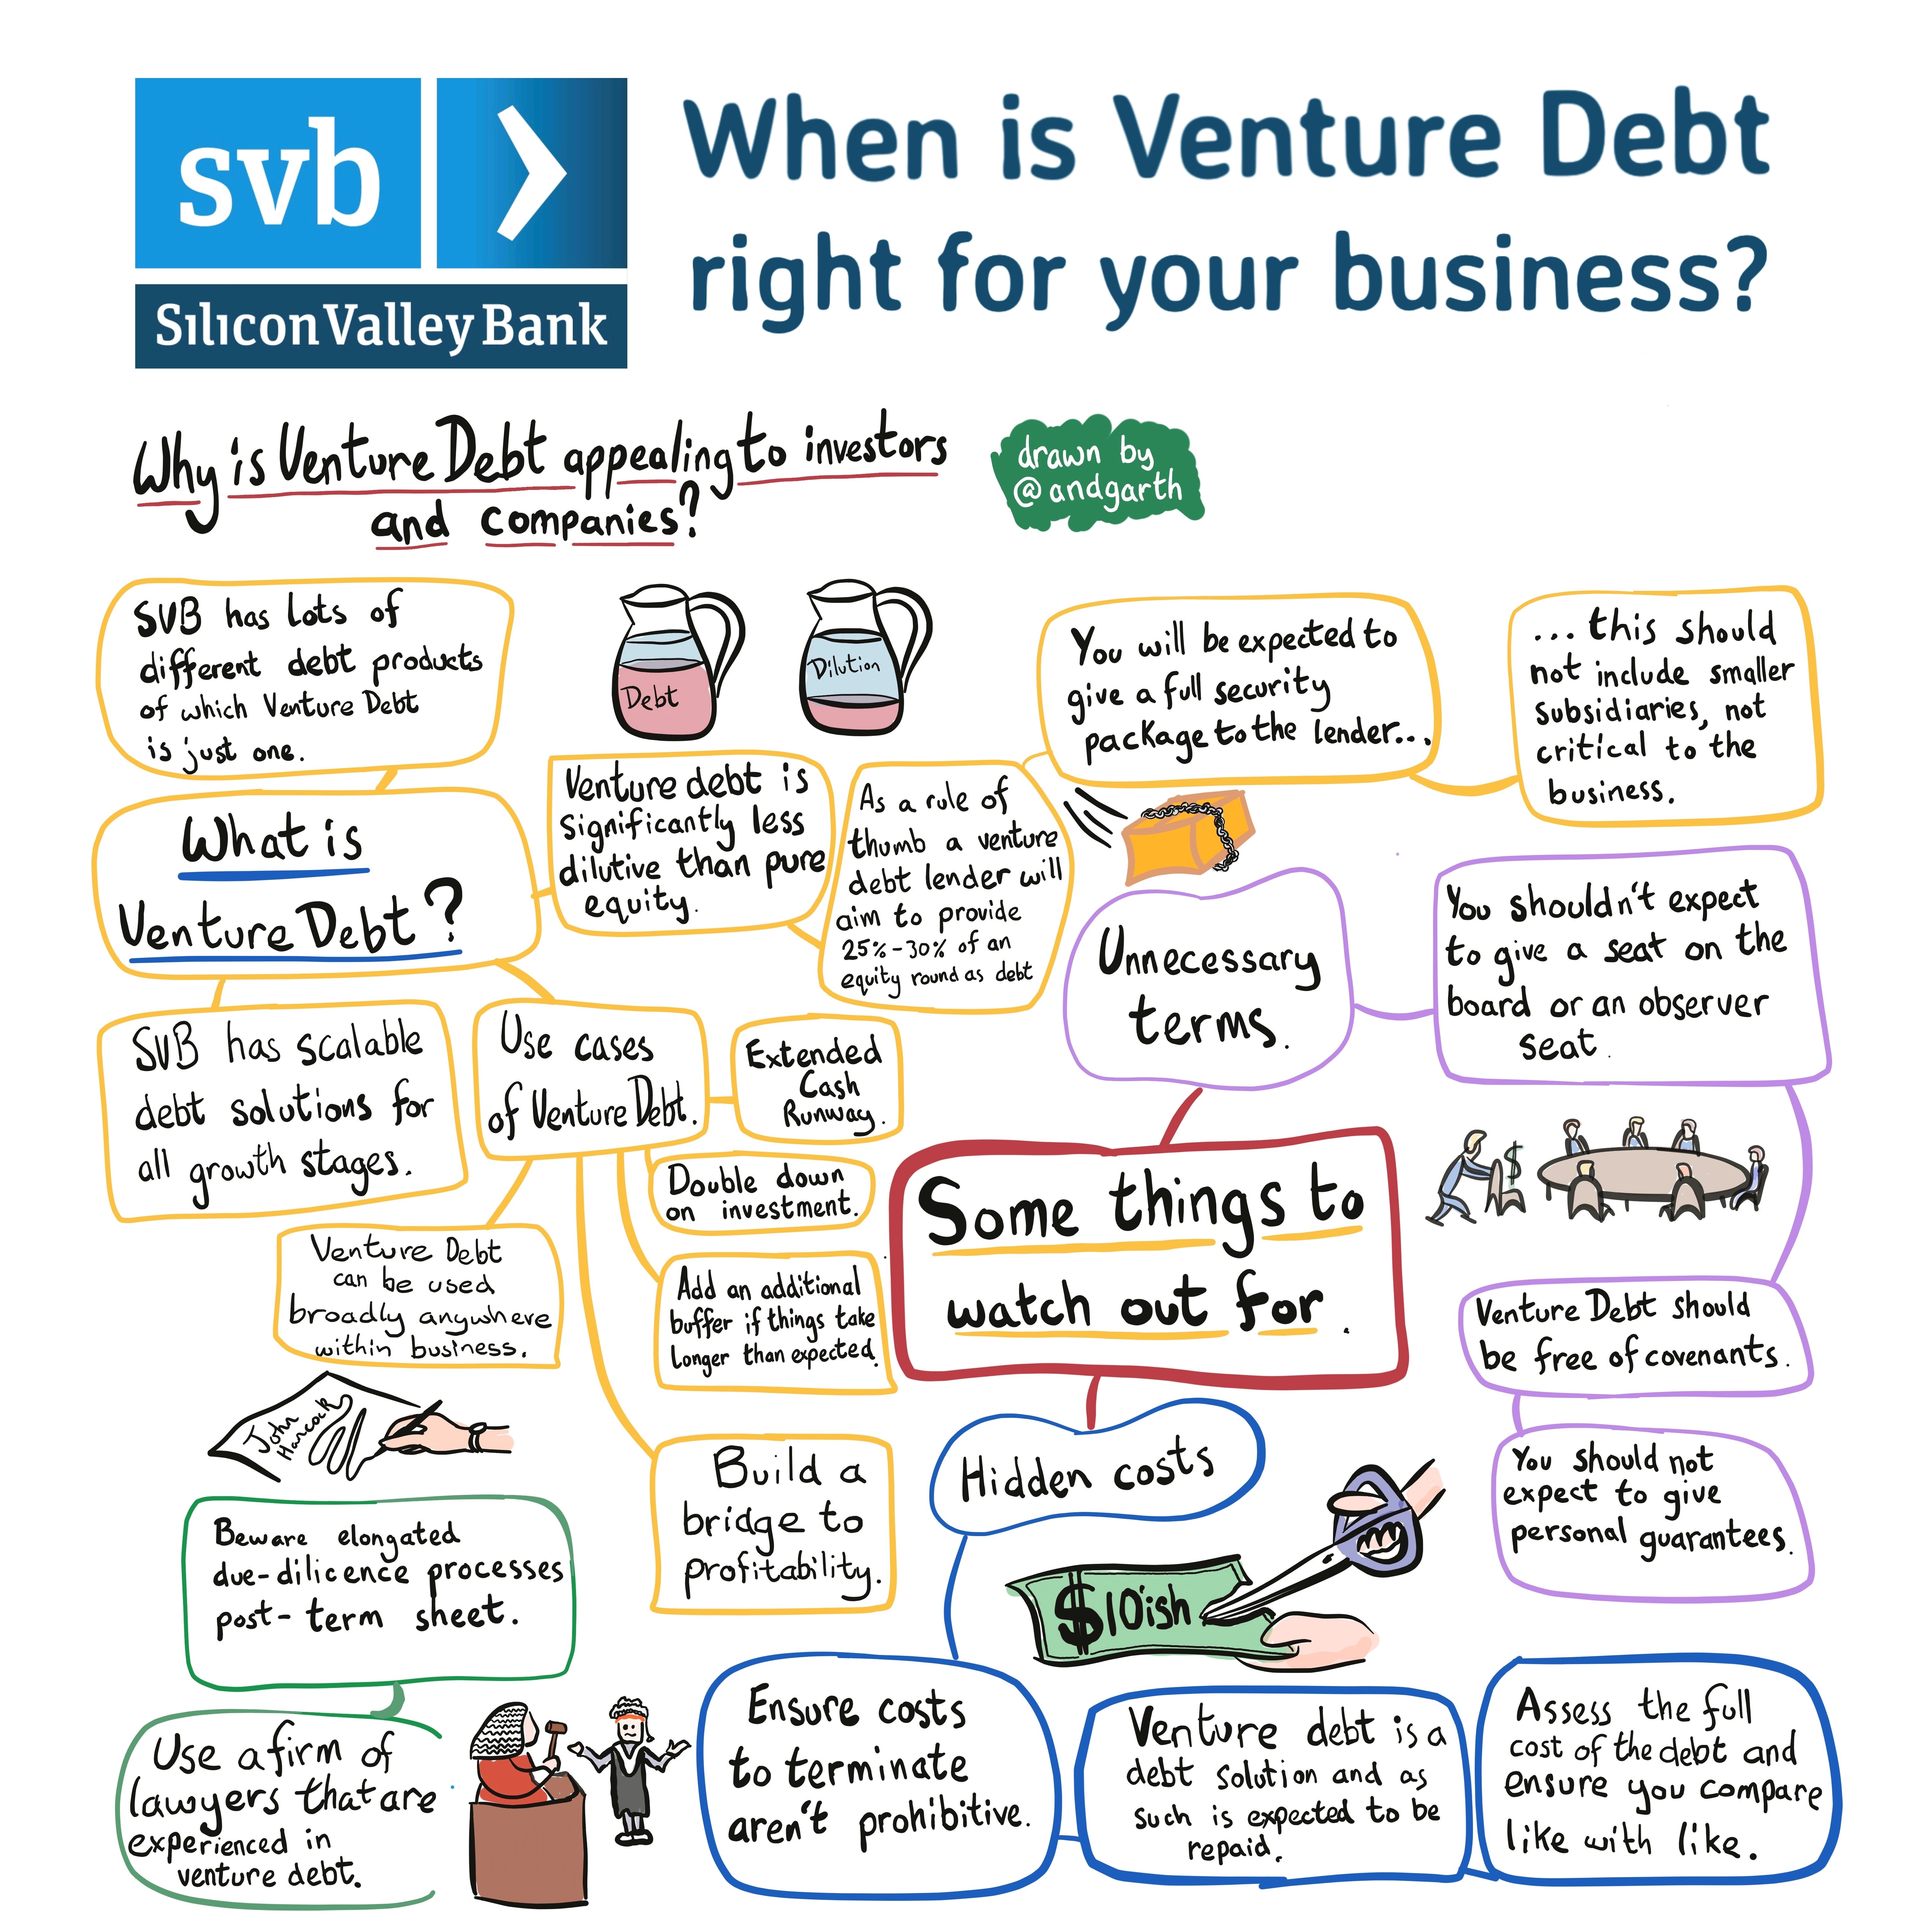 When is the right time for venture debt?